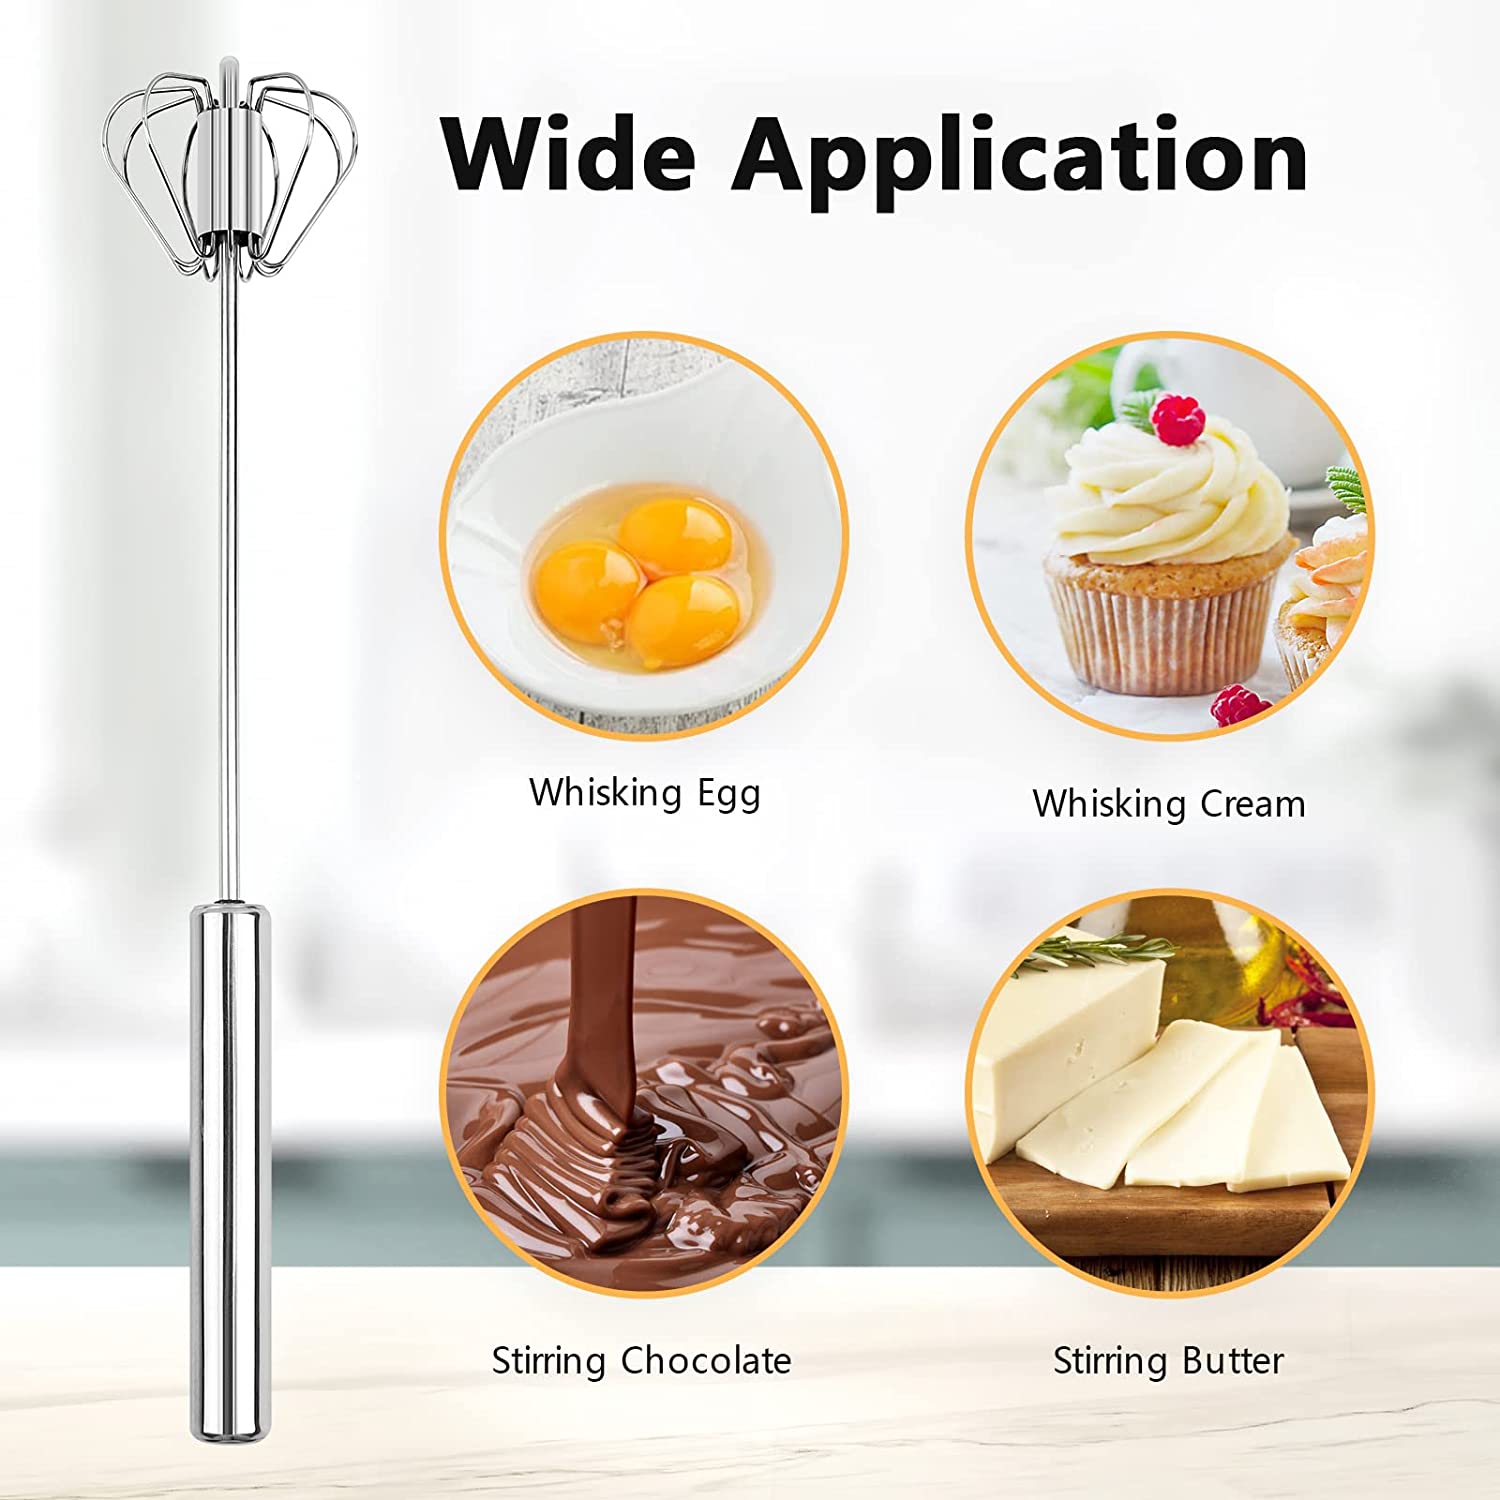 DS. Distinctive Style Semi Automatic Whisk 304 Stainless Steel Hand Push Spinning Whisk 12 inch Egg Beater for Blending Eggs, Frothing Milk